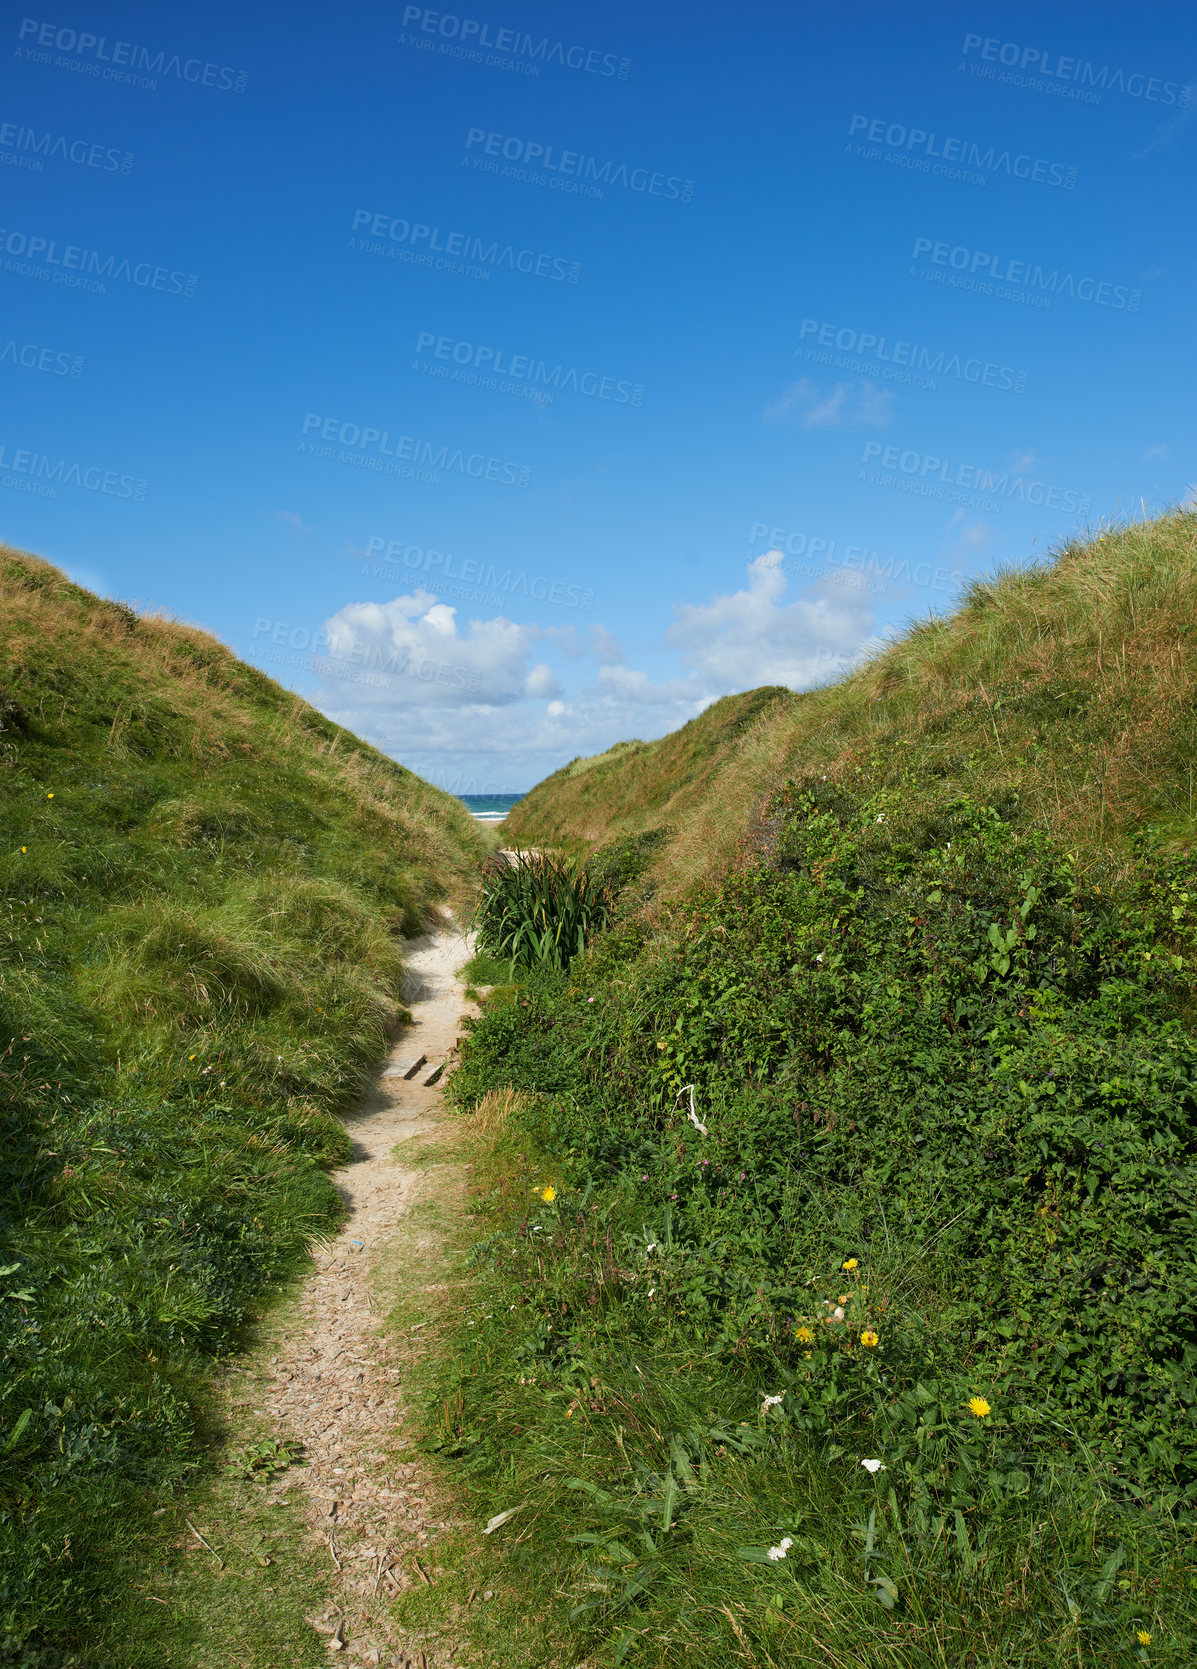 Buy stock photo Beautiful landscape with a secret path between grassy hills to a hideaway, hidden beach or secluded area with a blue sky copyspace. Peaceful and scenic view perfect for an adventure in nature